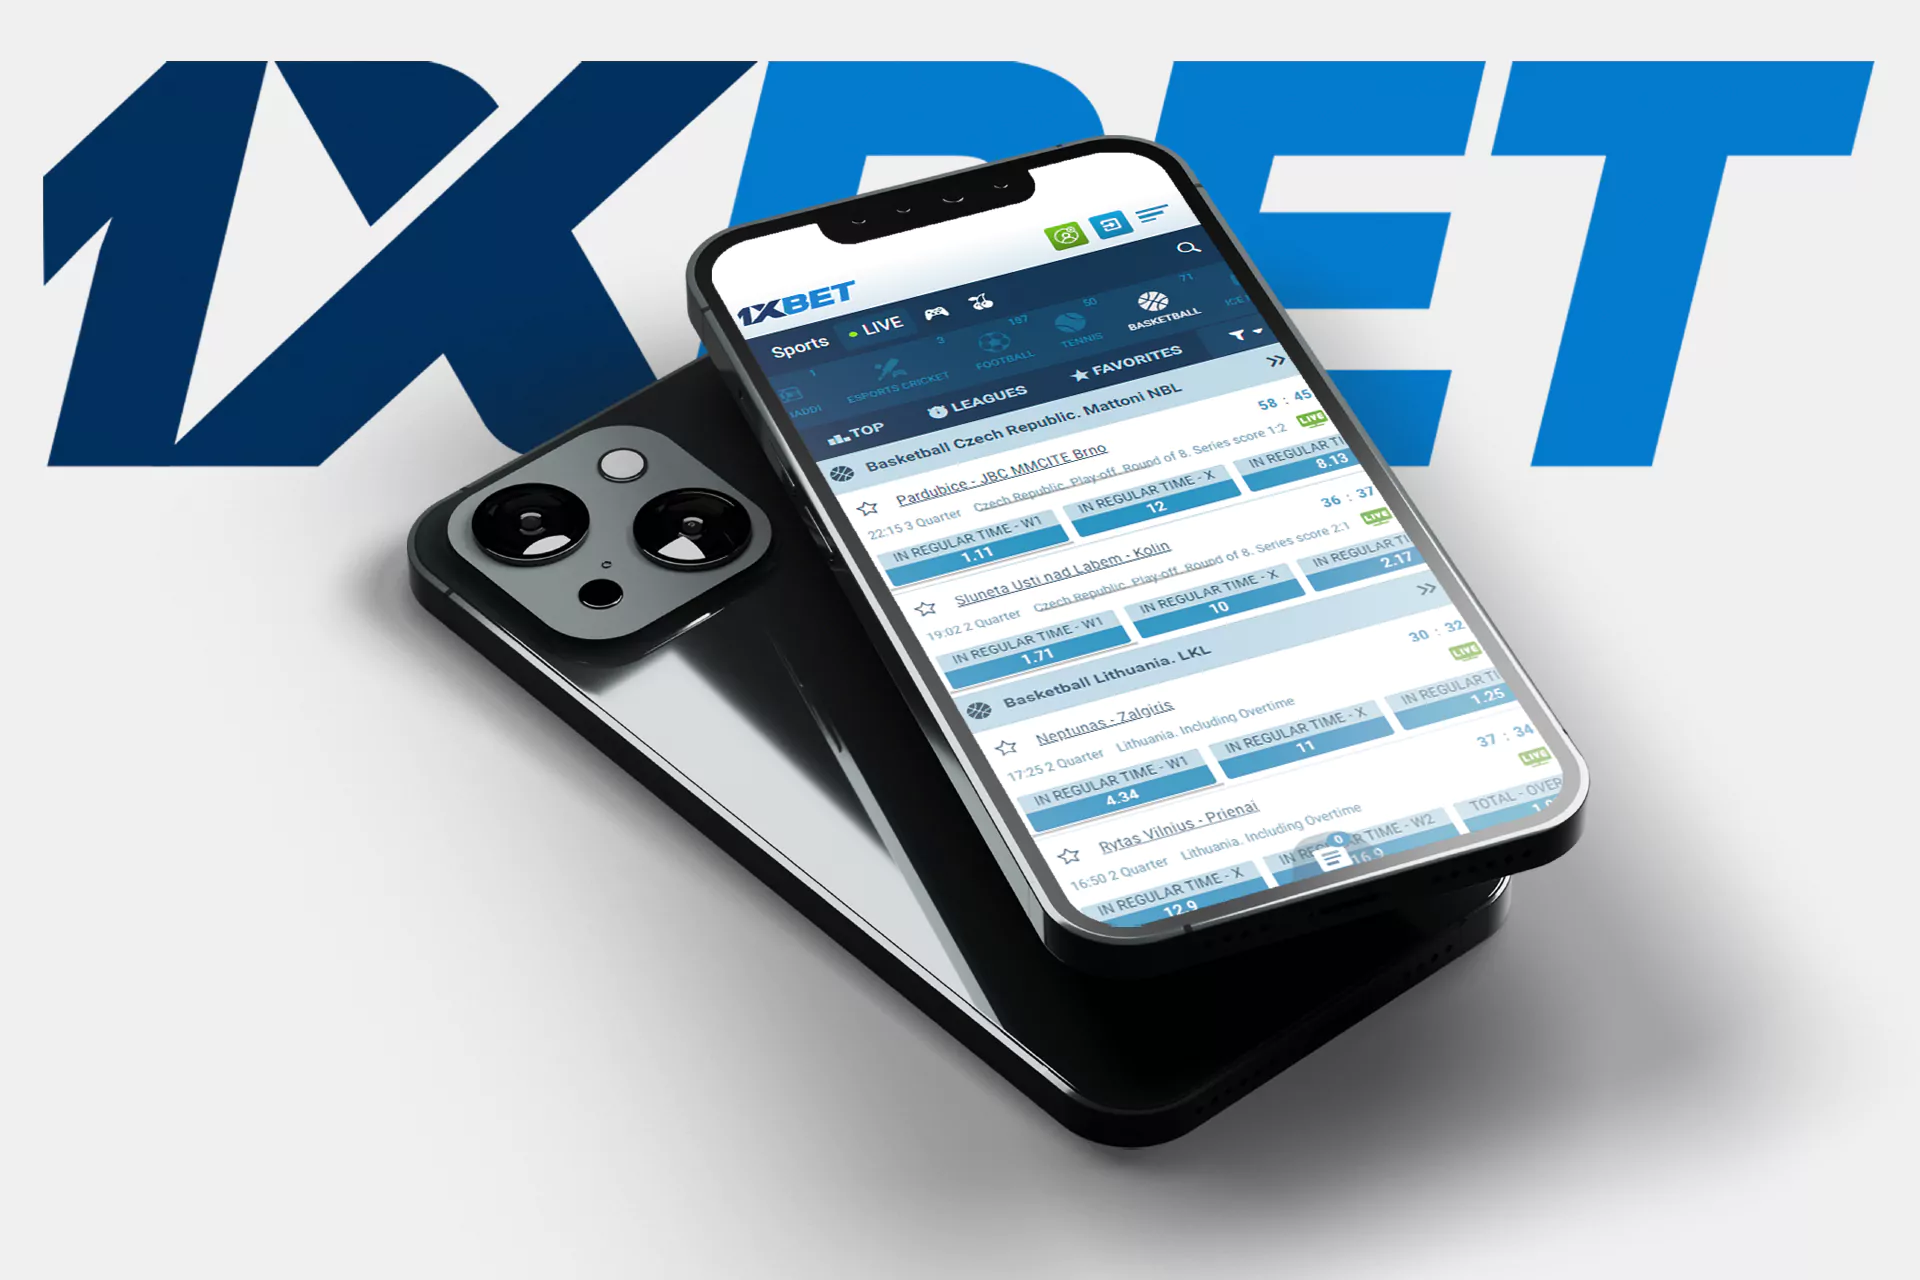 The 1xBet team developed a great betting app for the users.